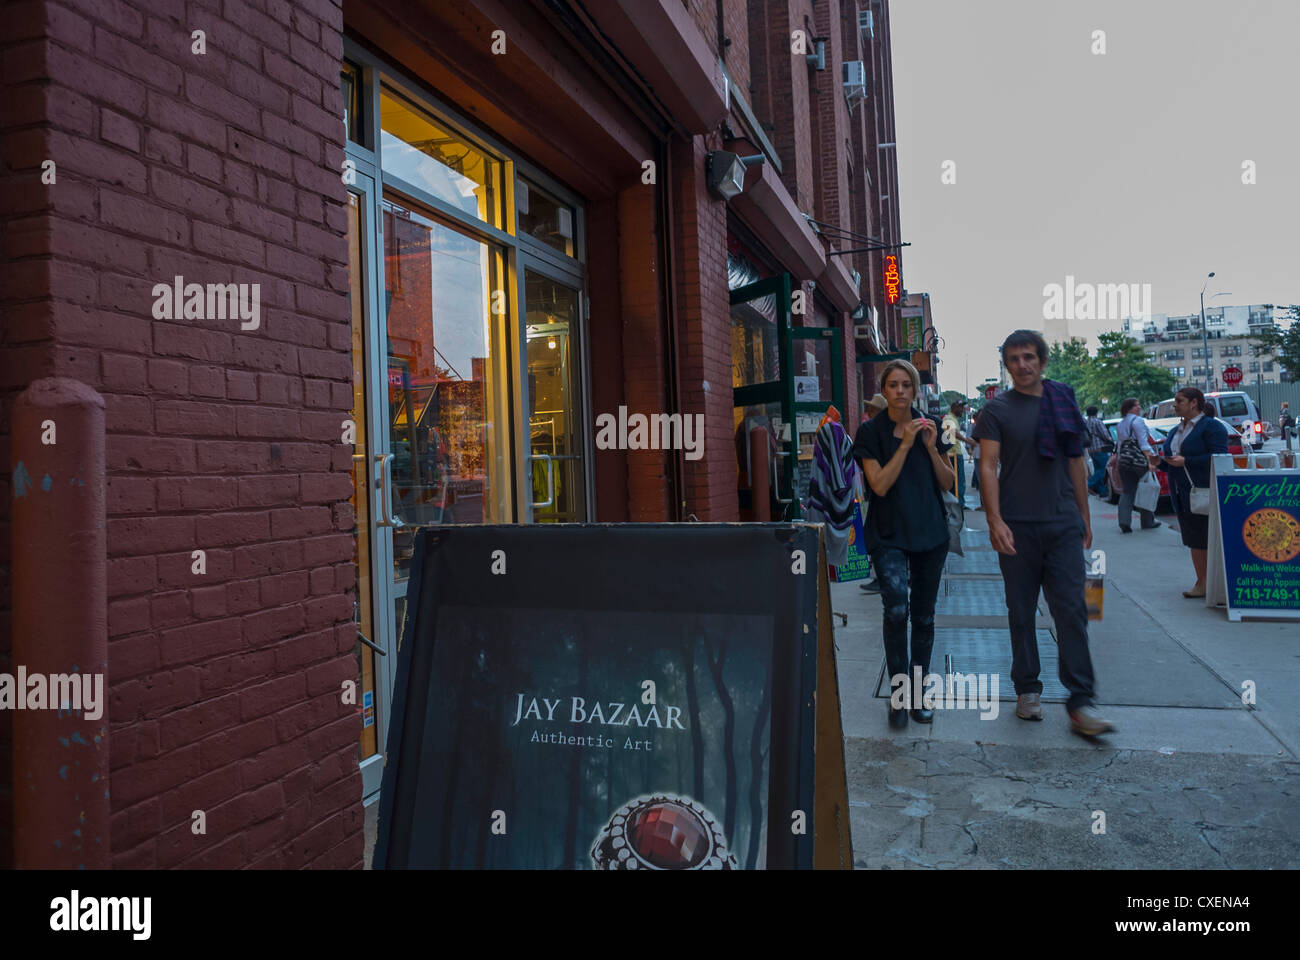 New York City, NY, USA, Street Scenes, People Walking, DUMBO Area, Brooklyn, Gentrification of city areas in US new yorkers buildings Stock Photo